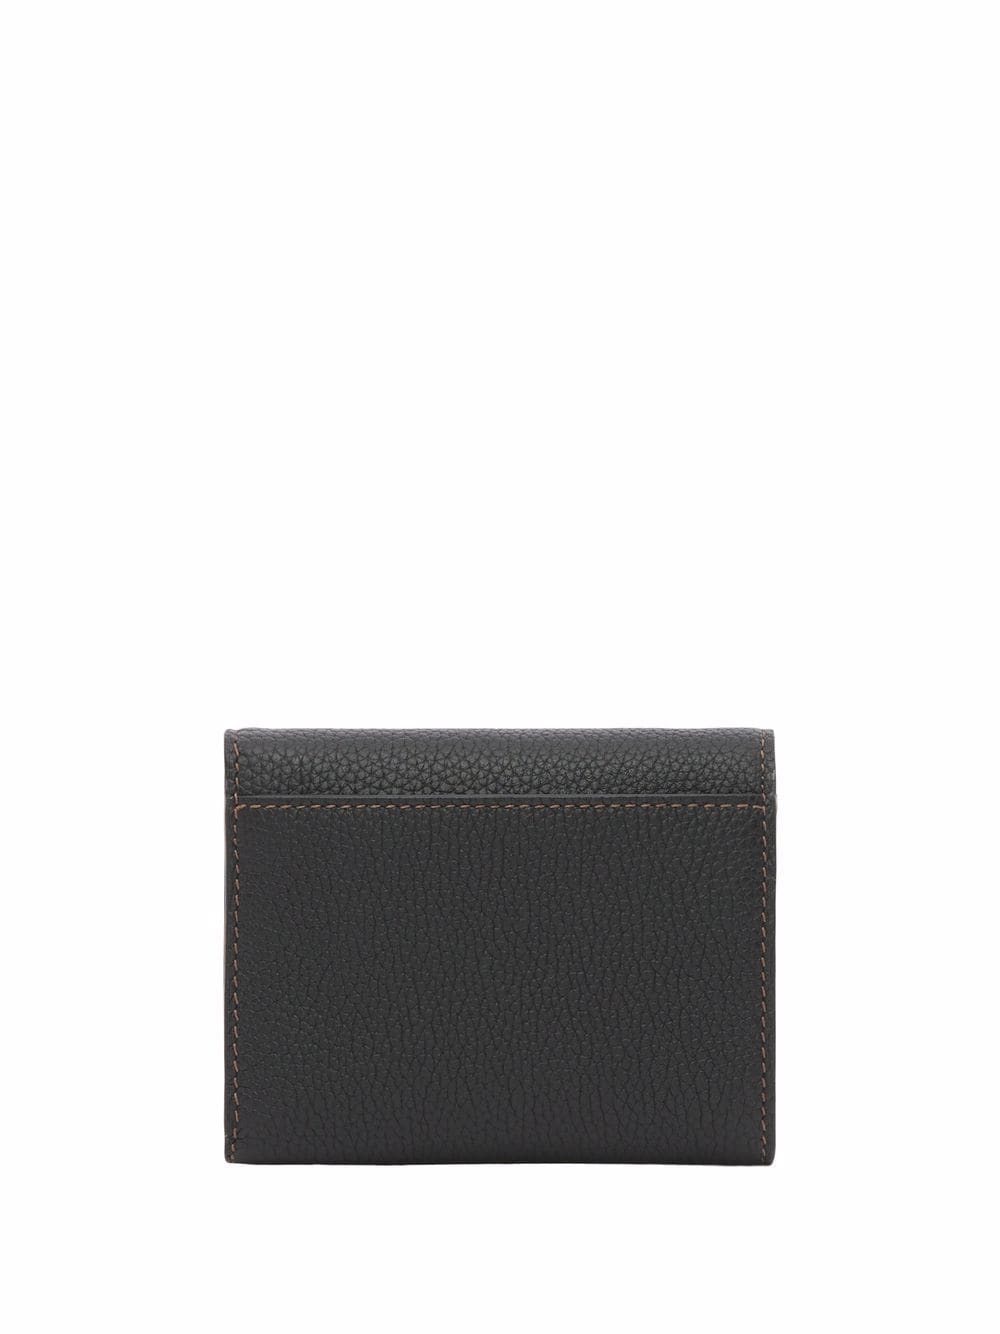 Image 2 of Burberry monogram grained leather wallet